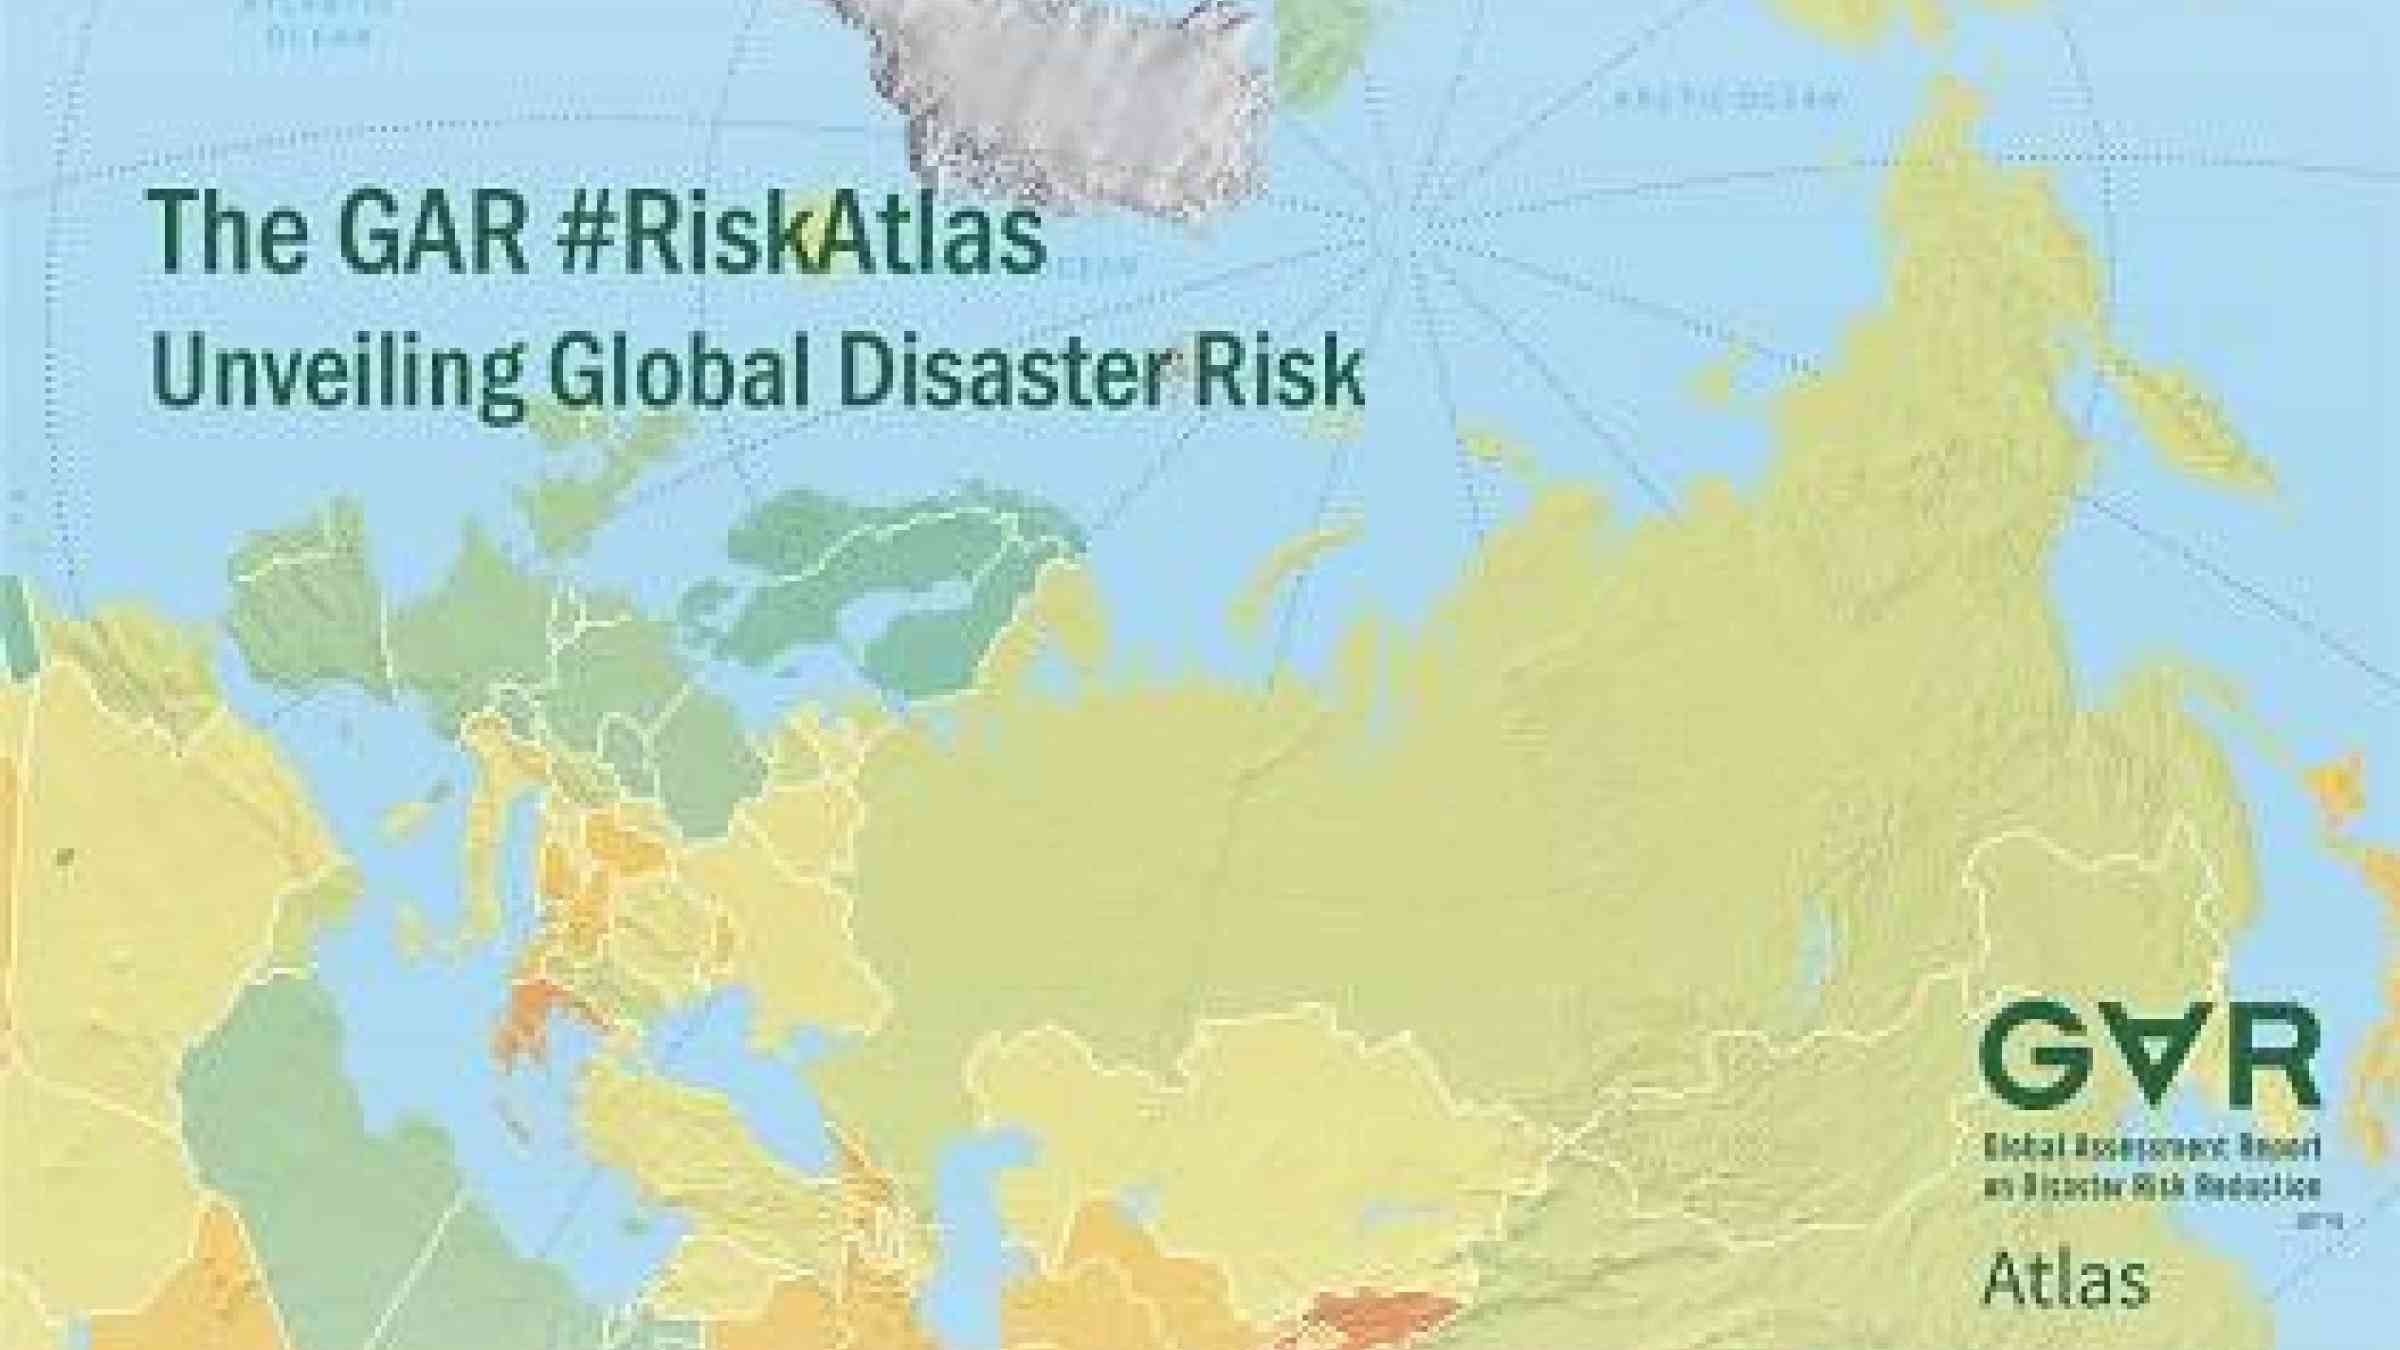 The GAR Atlas, which aims to expose hidden disaster risks, has been hailed as a milestone